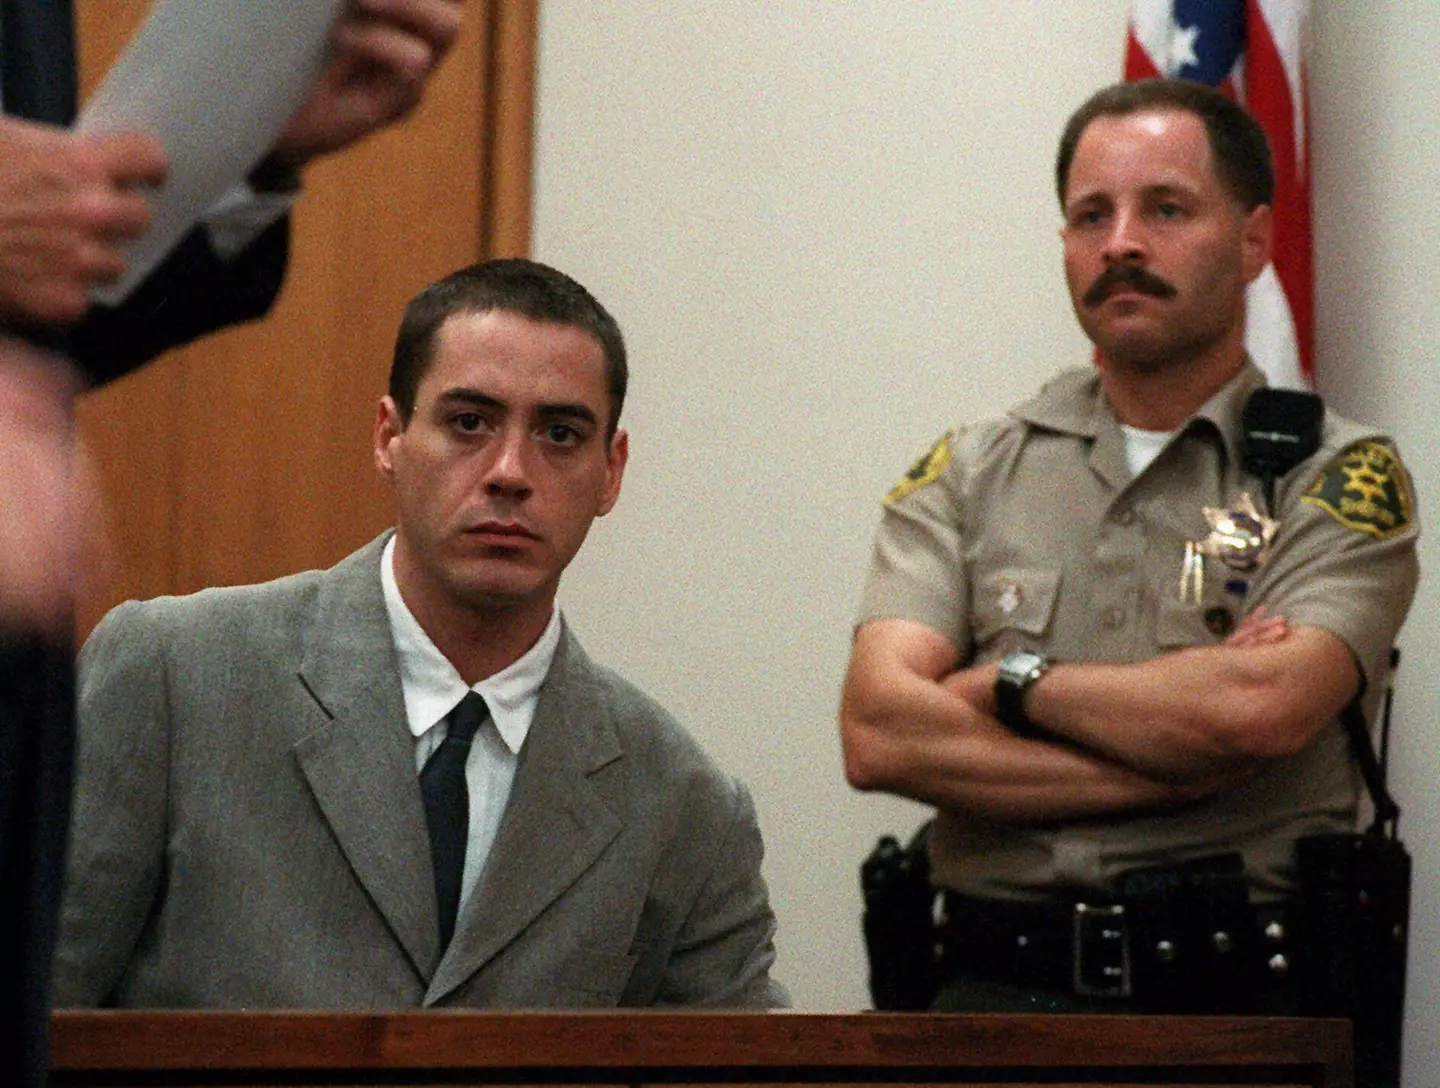 Downey Jr in court over drug charges in 1996.